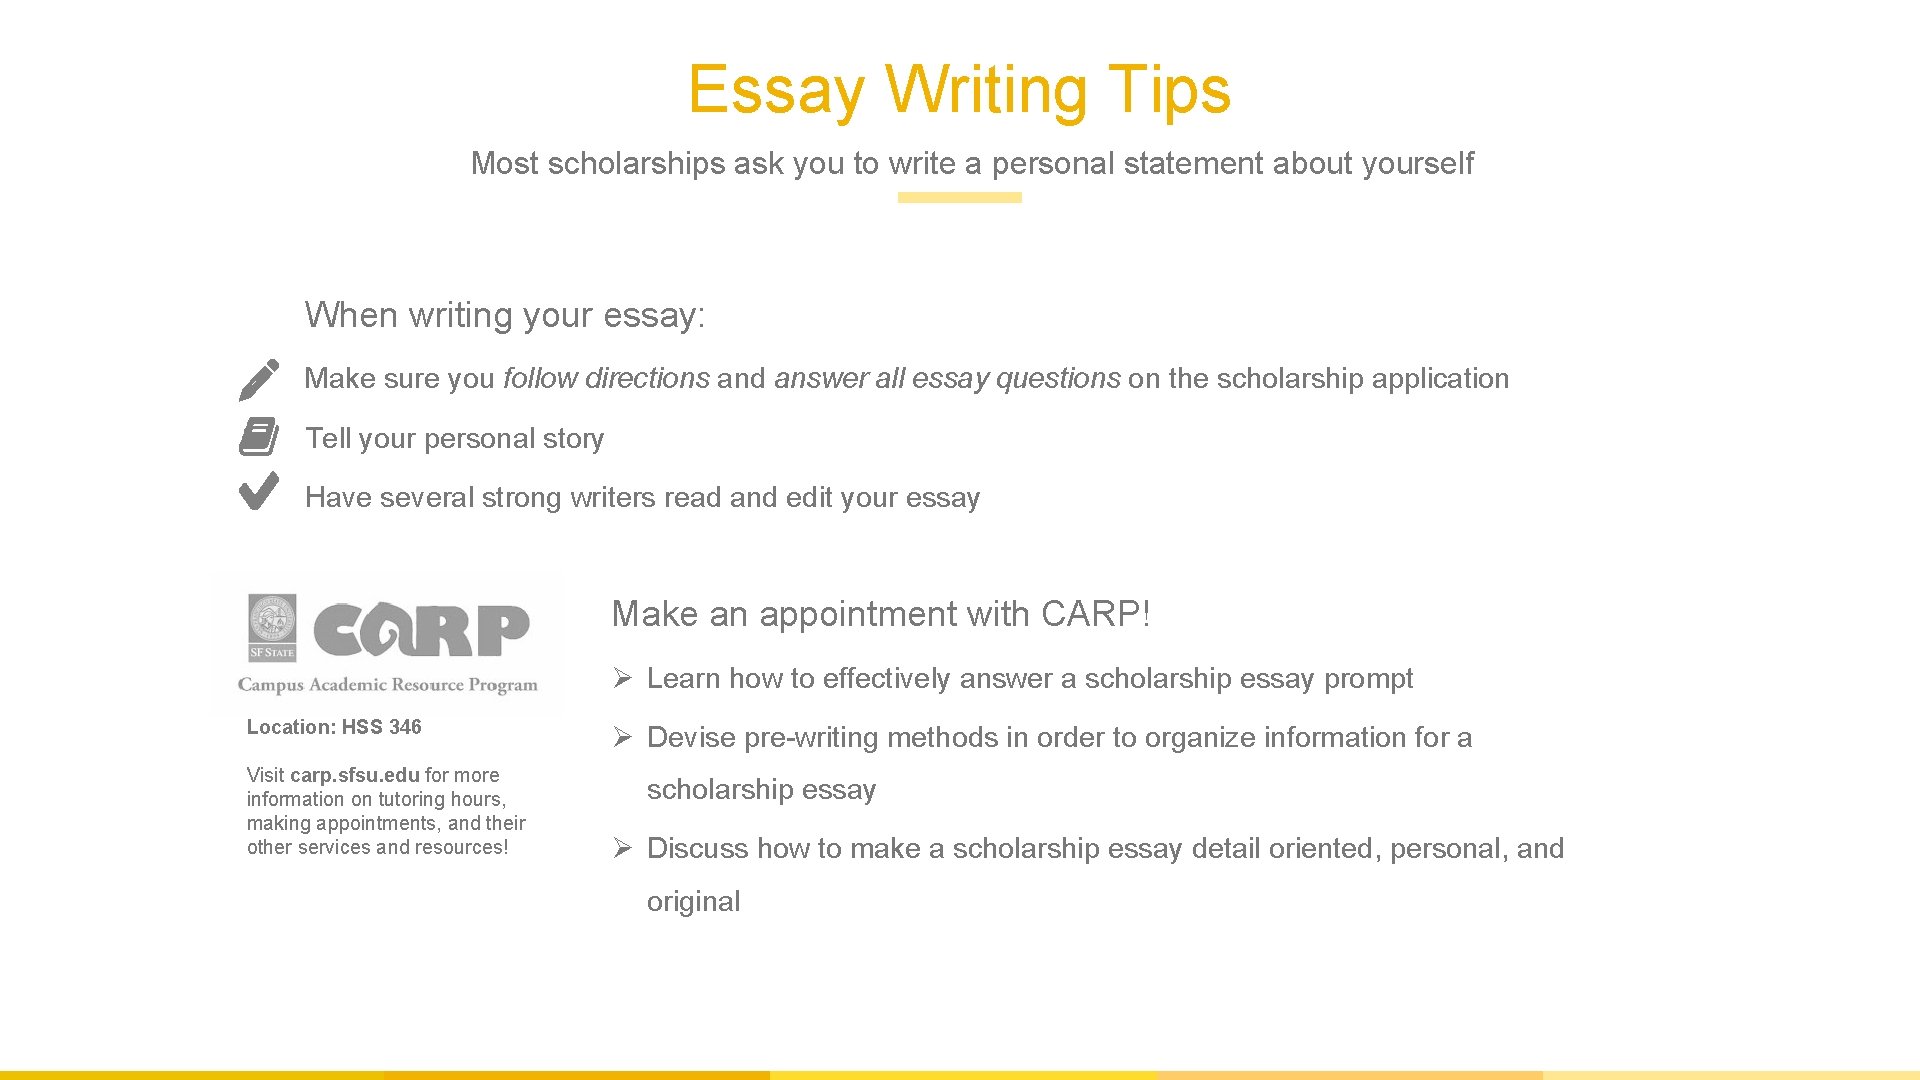 Essay Writing Tips Most scholarships ask you to write a personal statement about yourself